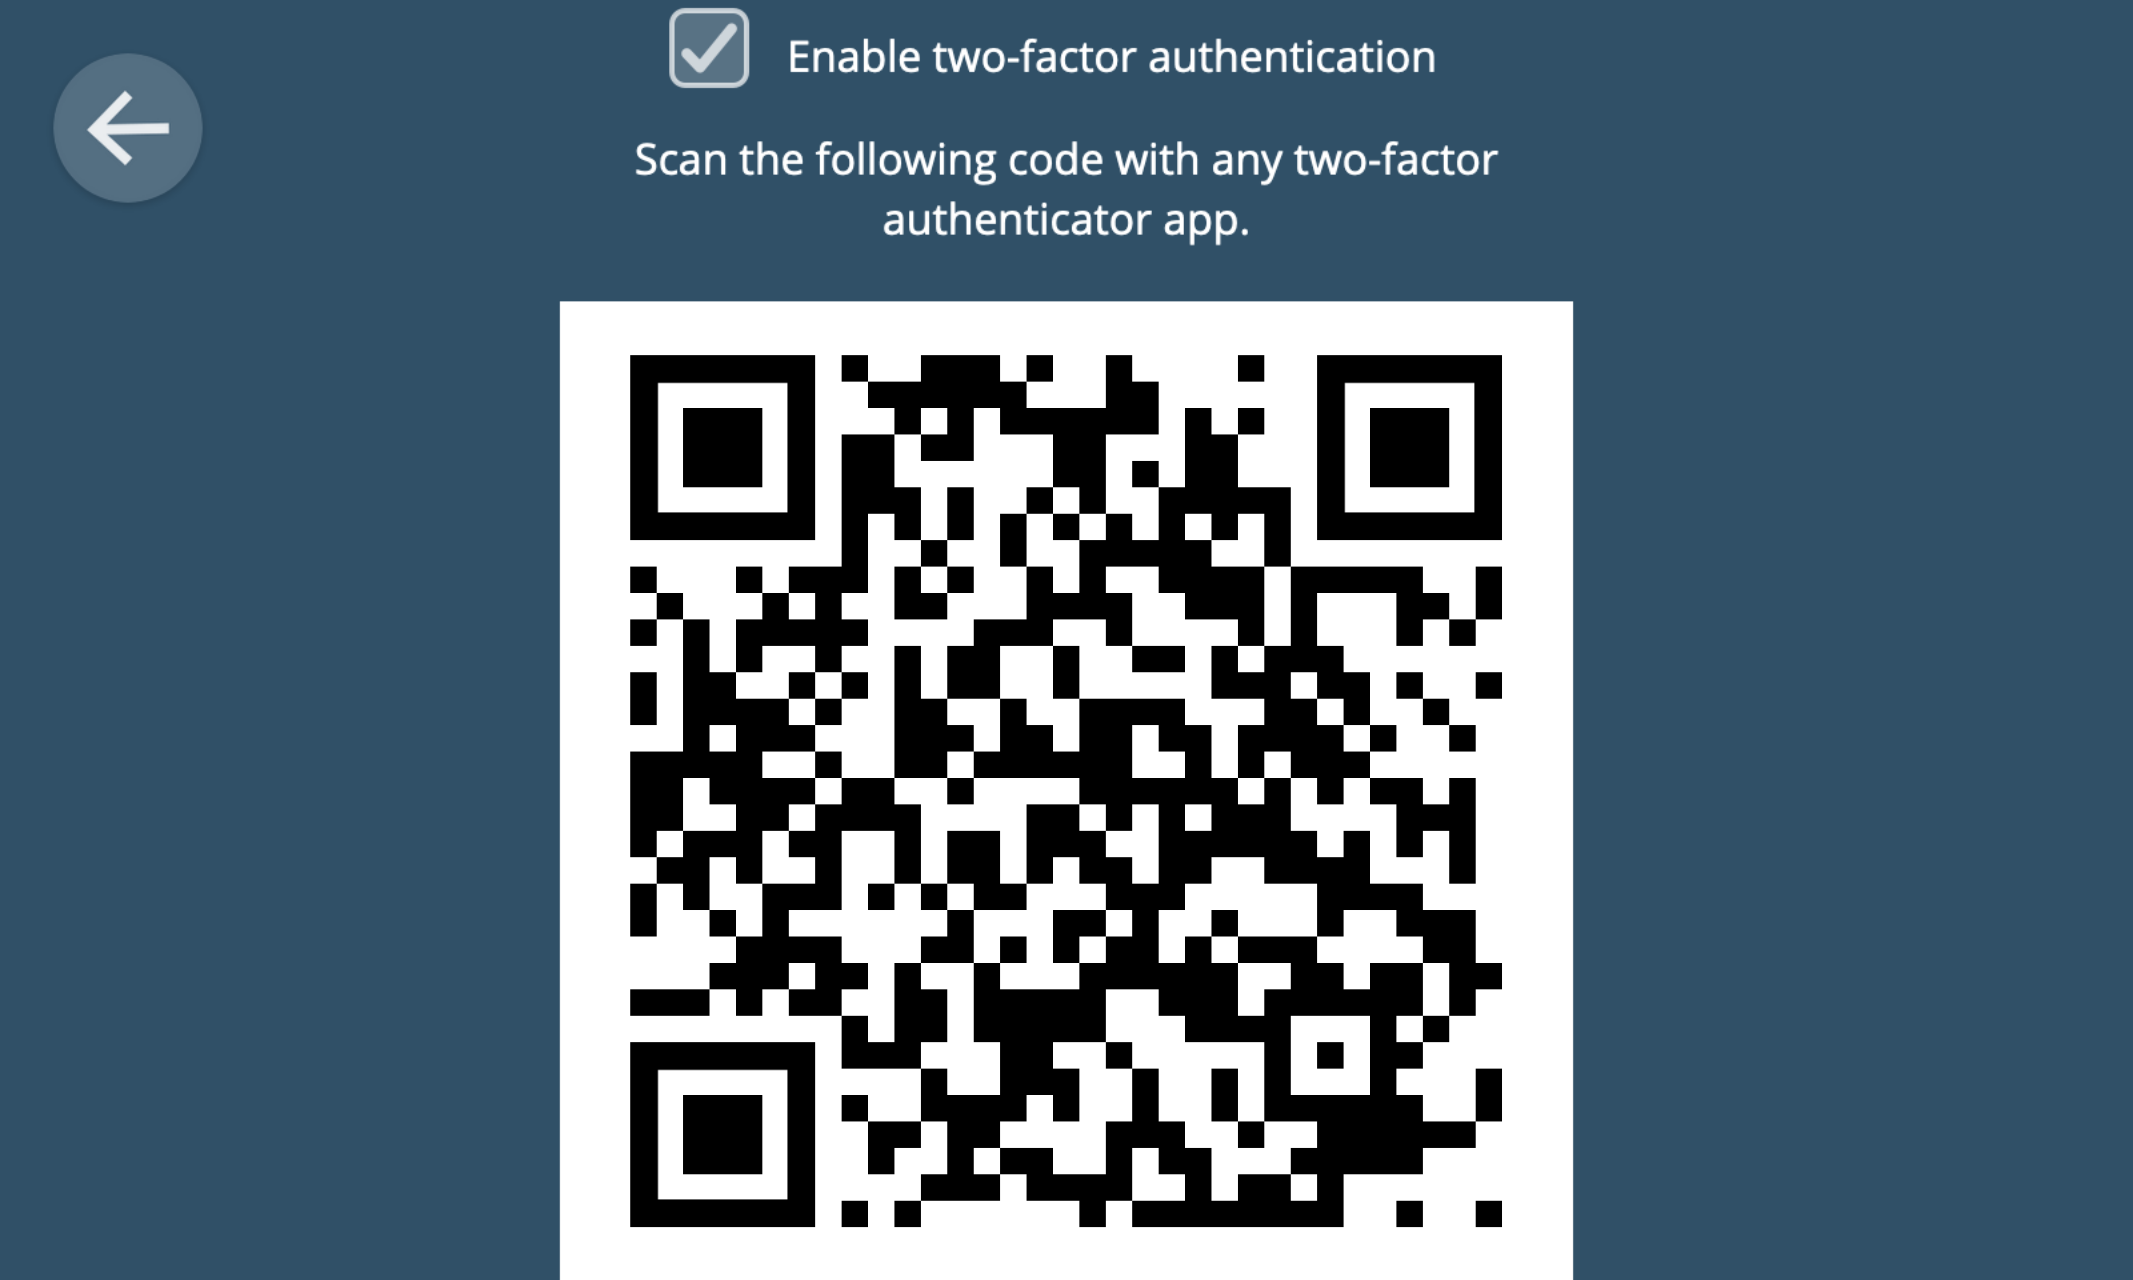 Screenshot showing the two-factor authentication option ticked, and a QR code